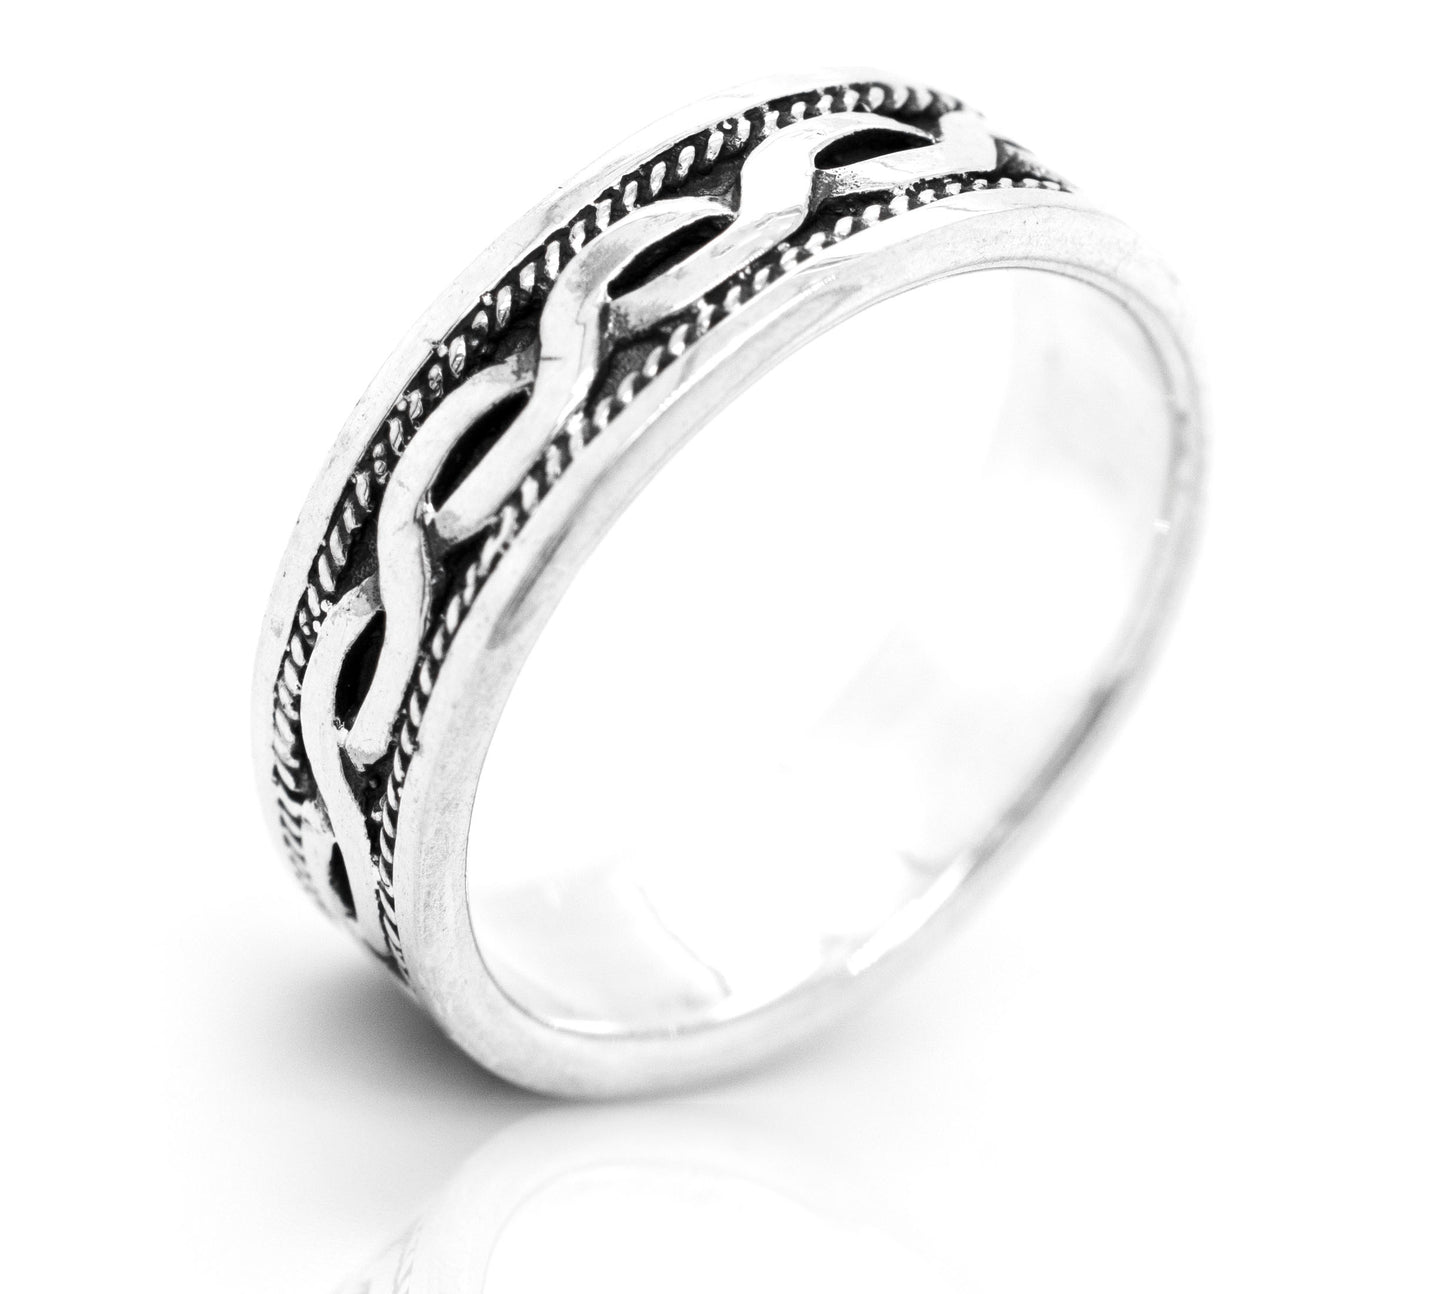 A Braided Rope Band with an intricate cultural design.